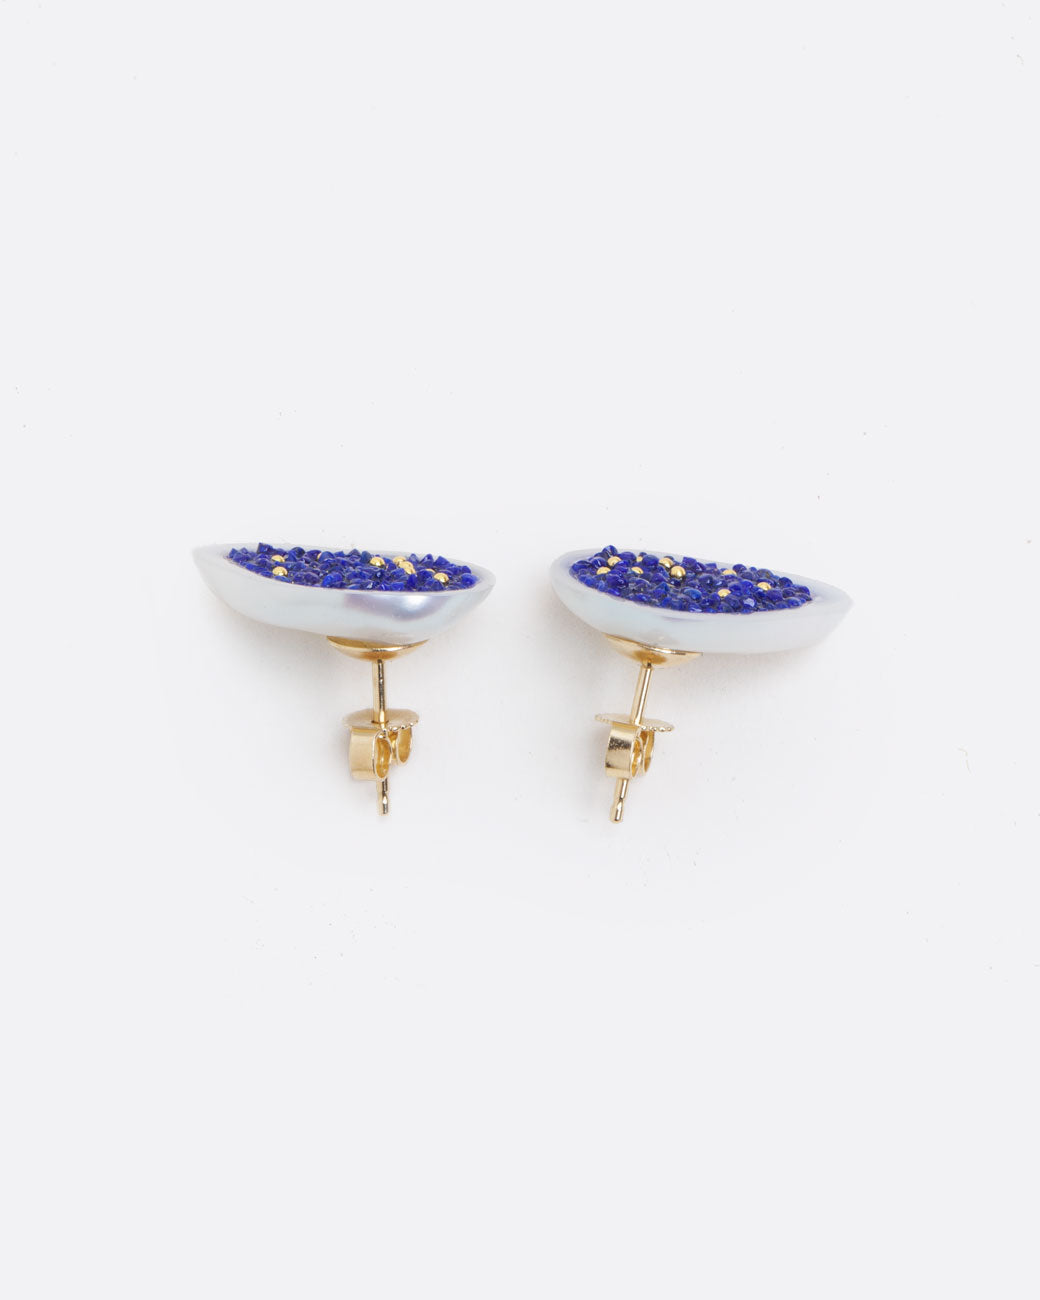 two earrings of a white souffle pearl that has been hollowed out and filled with small lapis pieces and small gold beads. with a yellow gold post back and yellow gold butterfly backing. view from above to show the backing and how flat the pearl is.